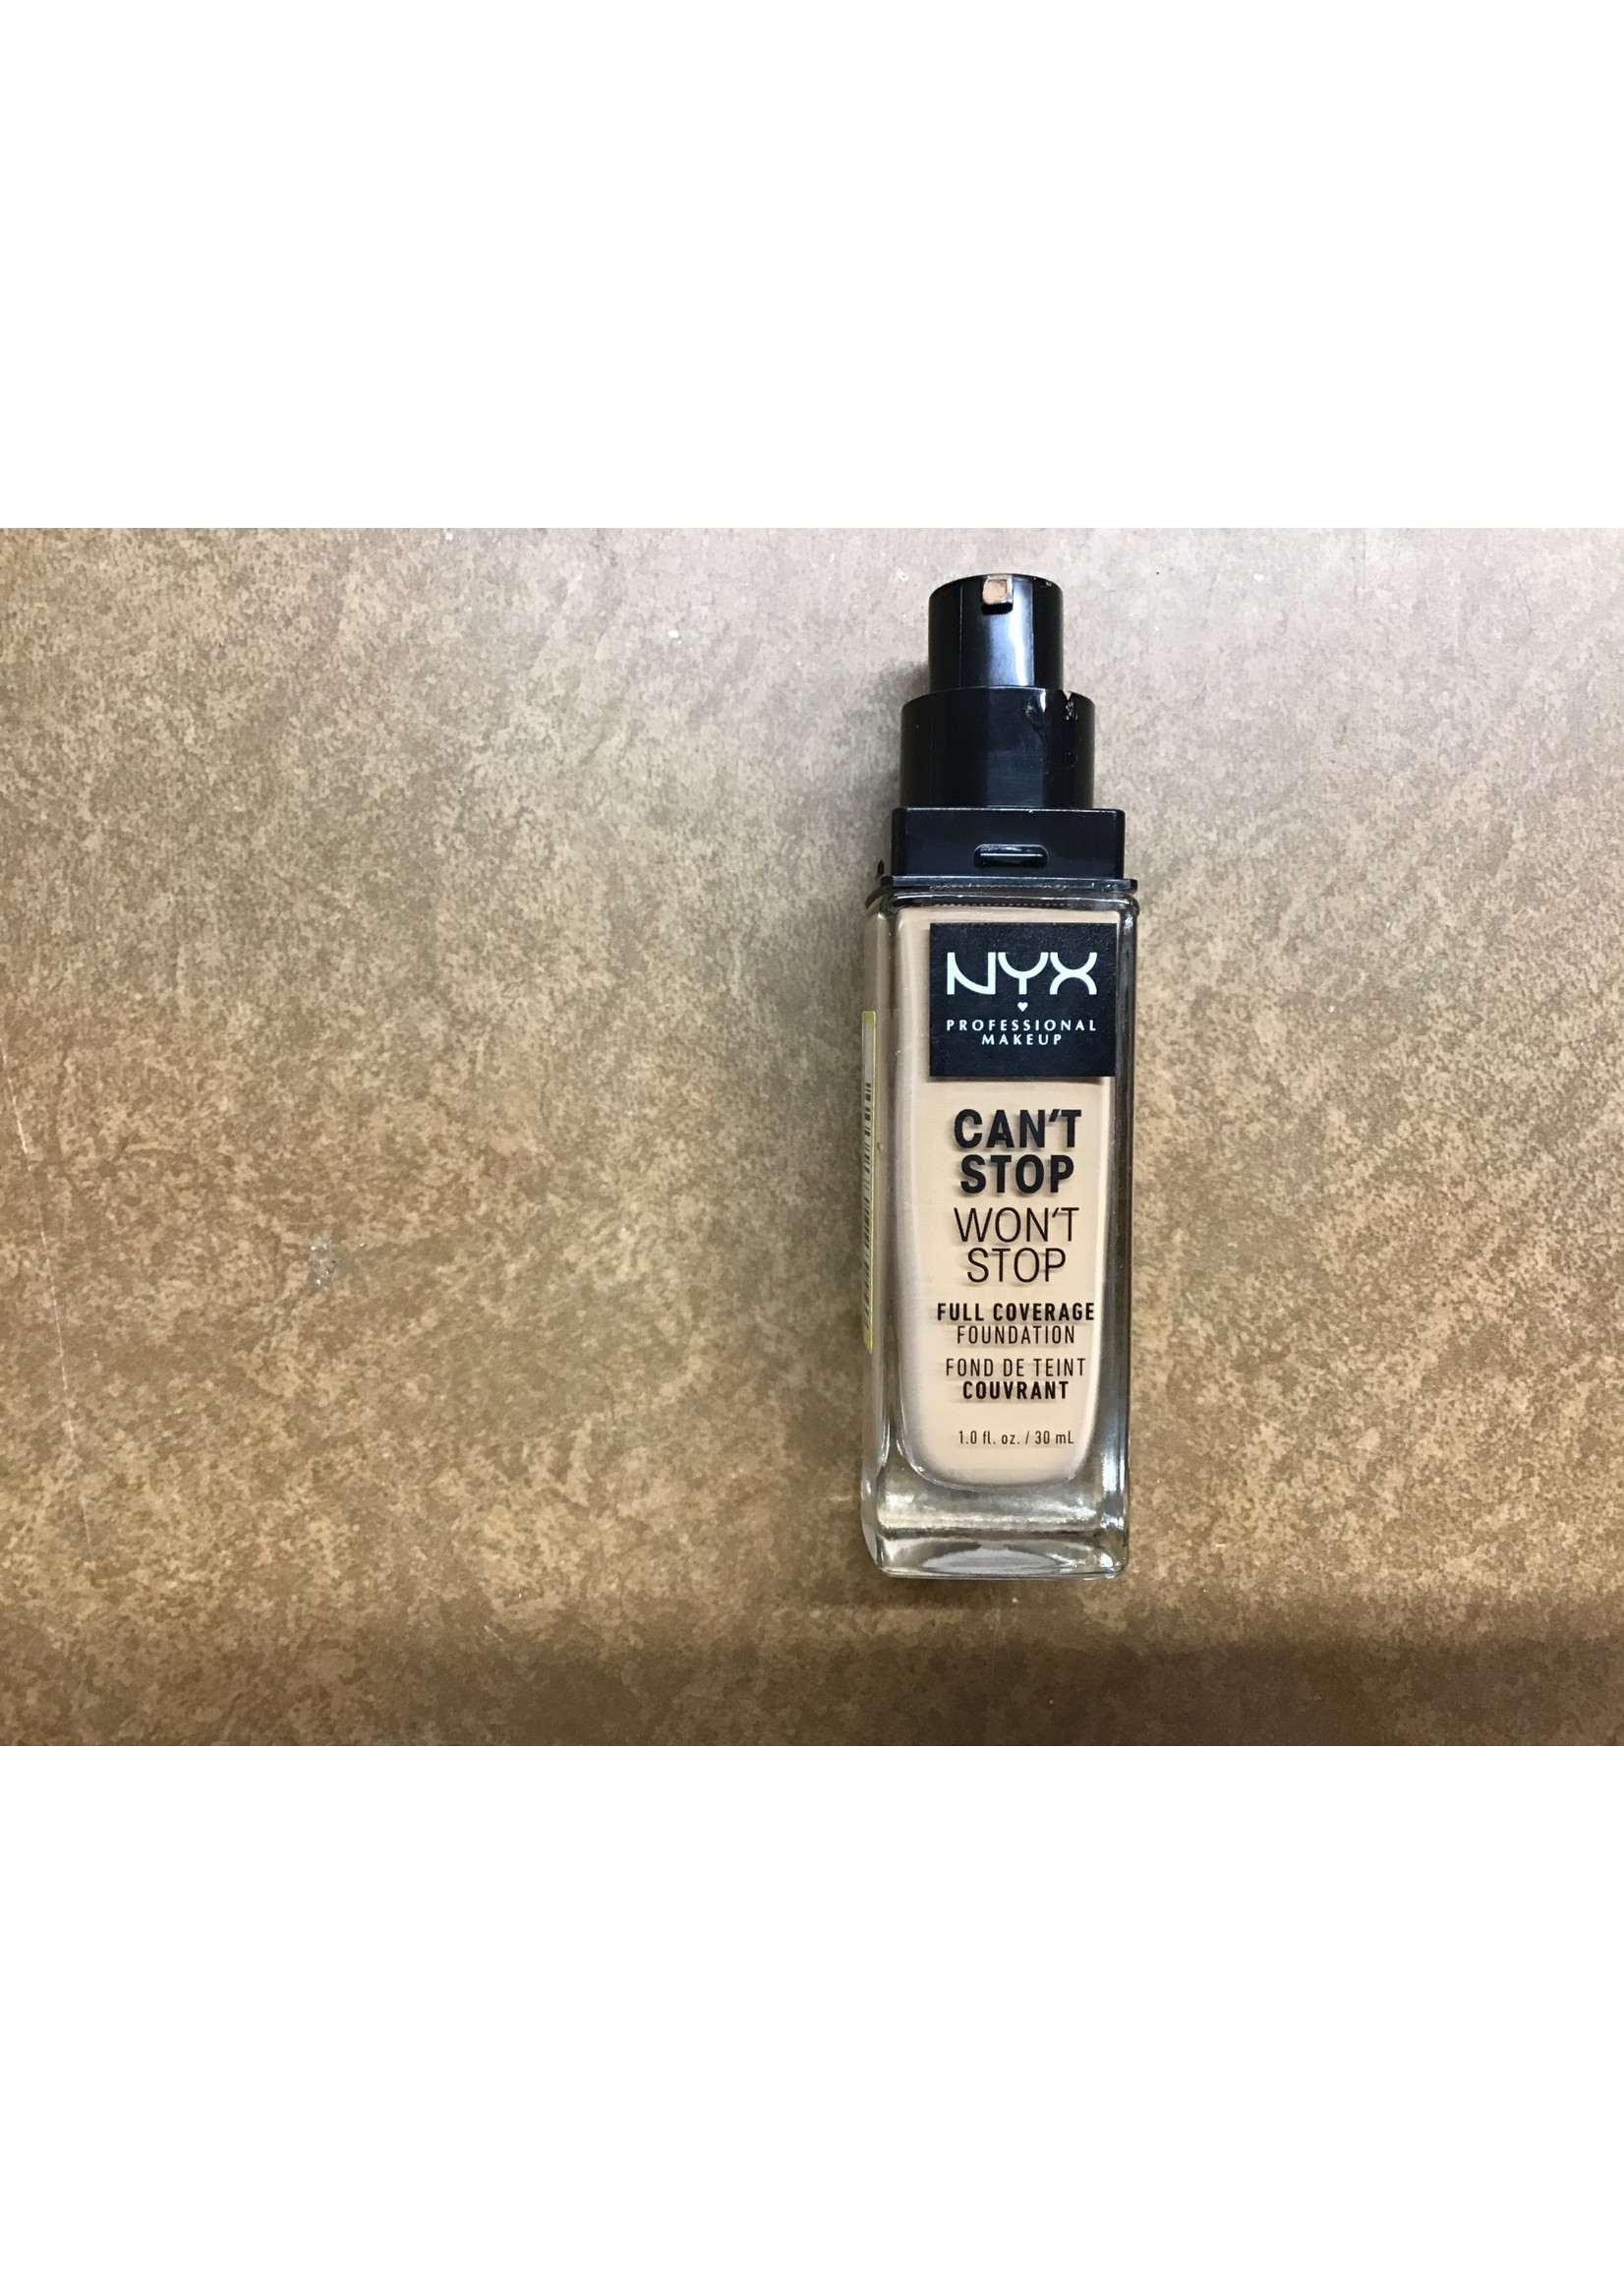 NYX Professional Makeup Can't Stop Won't Stop 24Hr Full Coverage Matte Finish Foundation - 09 Medium Olive - 1.3 fl oz